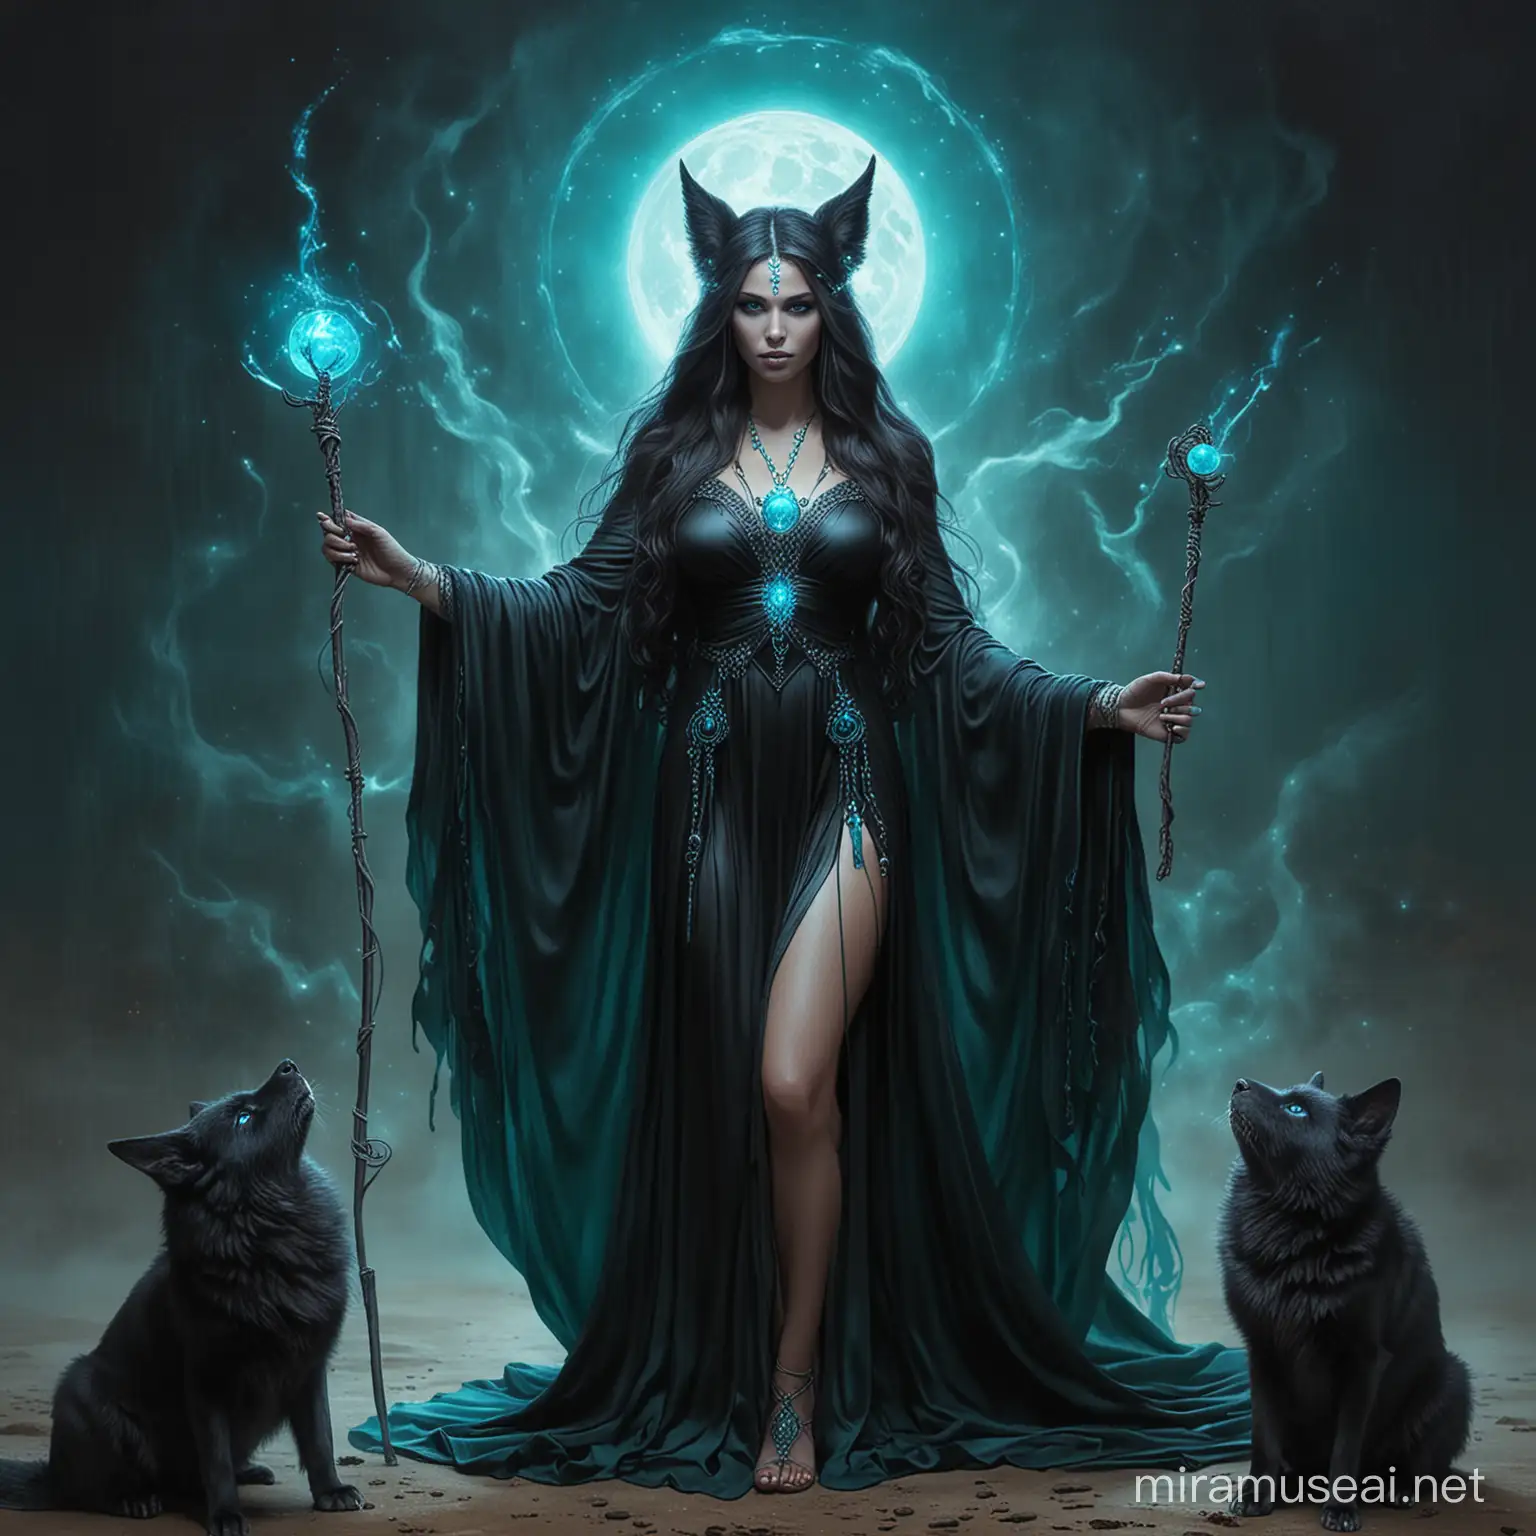 Goddess of dark magic. Wearing a long flowing black robe. Holding a staff in one hand and an orb of turquoise blue light on the other. Surrounded by three vixens